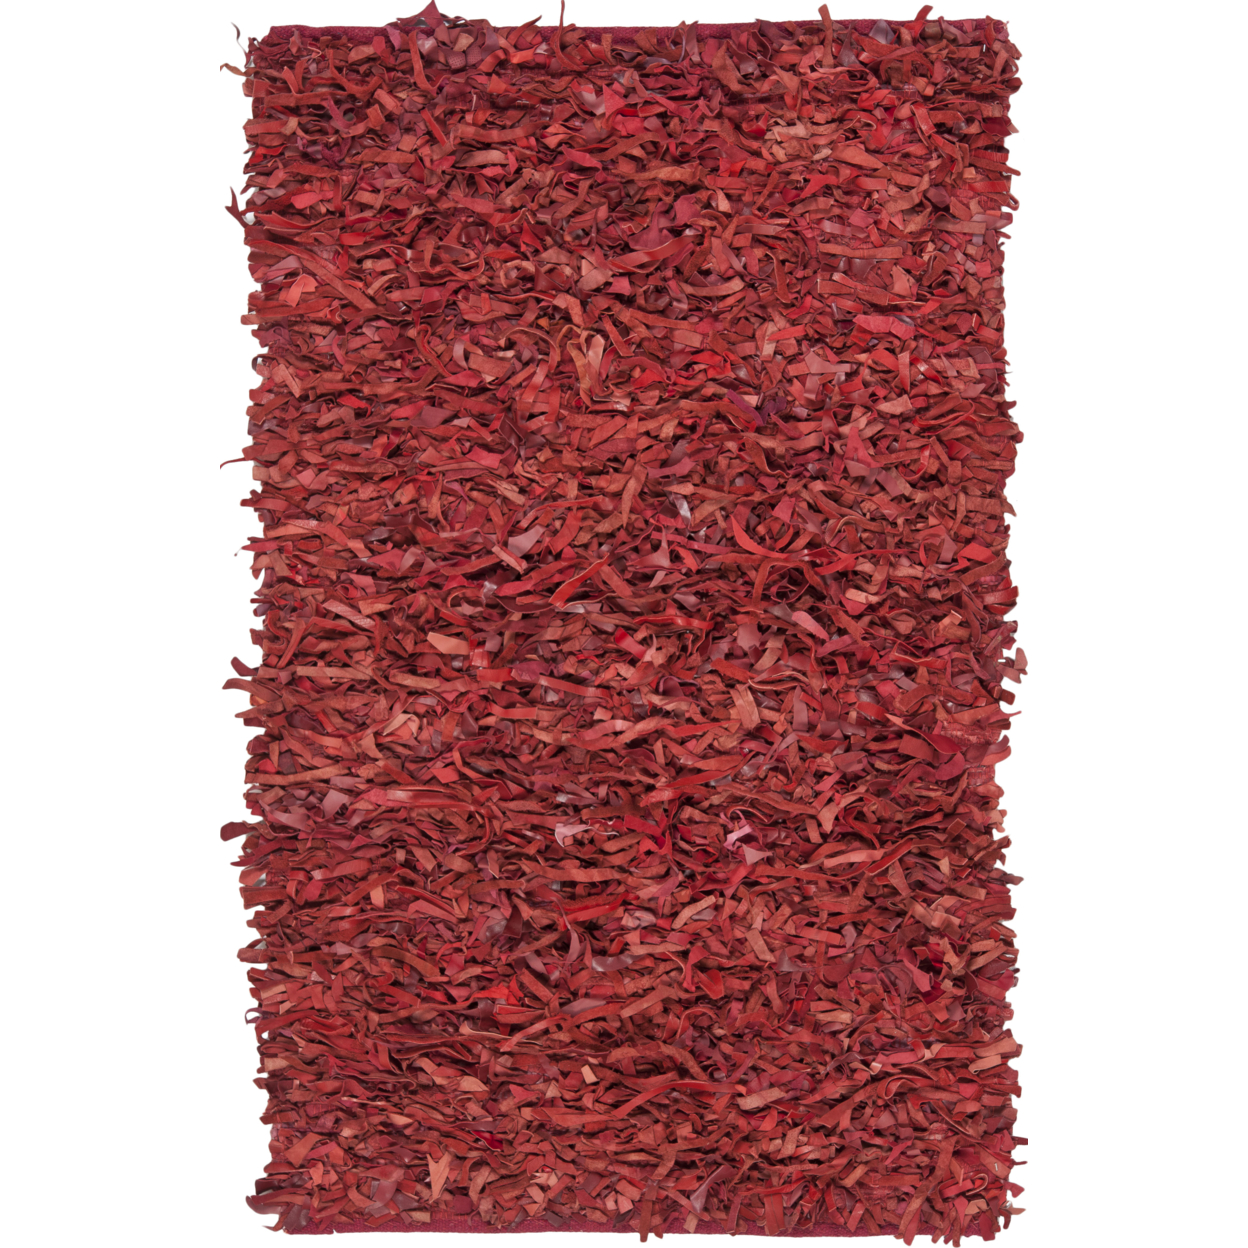 SAFAVIEH Leather Shag LSG511D Hand-knotted Red Rug - 4' Round